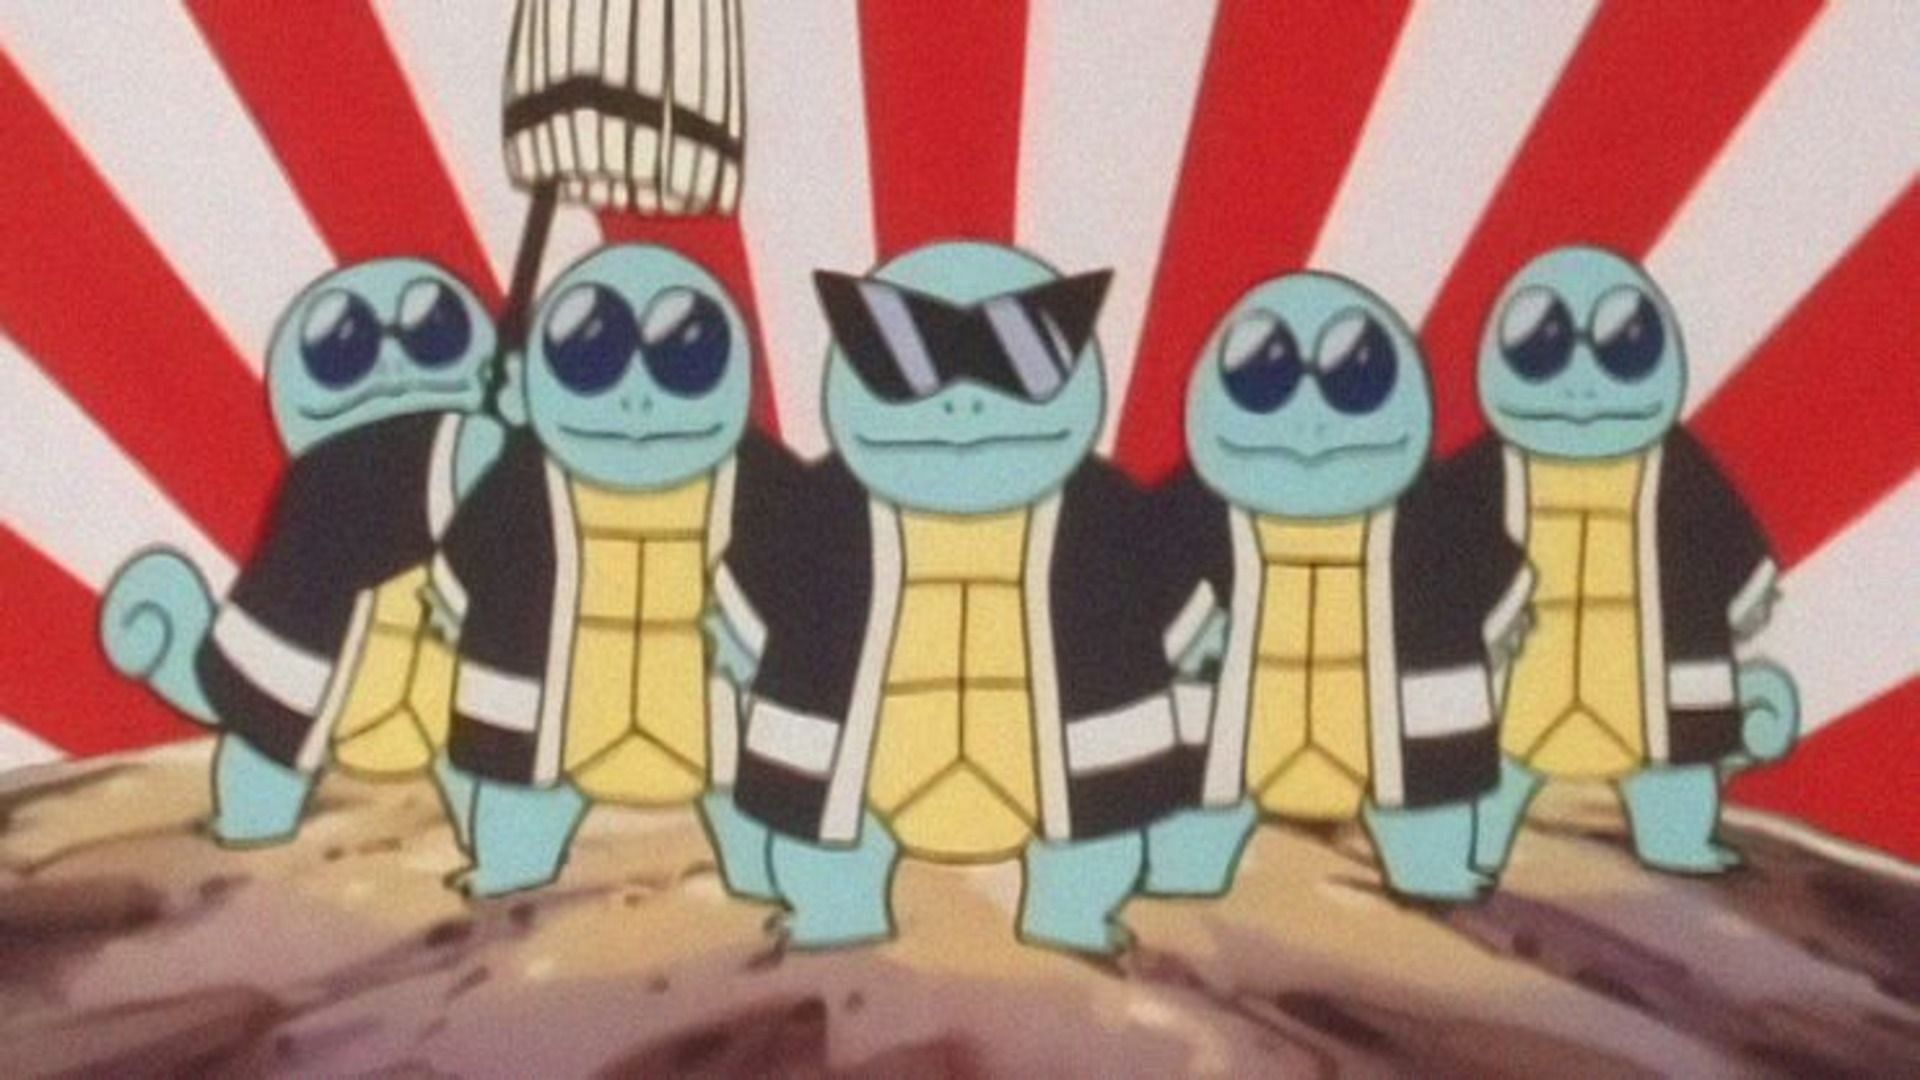 Is Shiny Sunglasses Squirtle available in Pokemon GO?